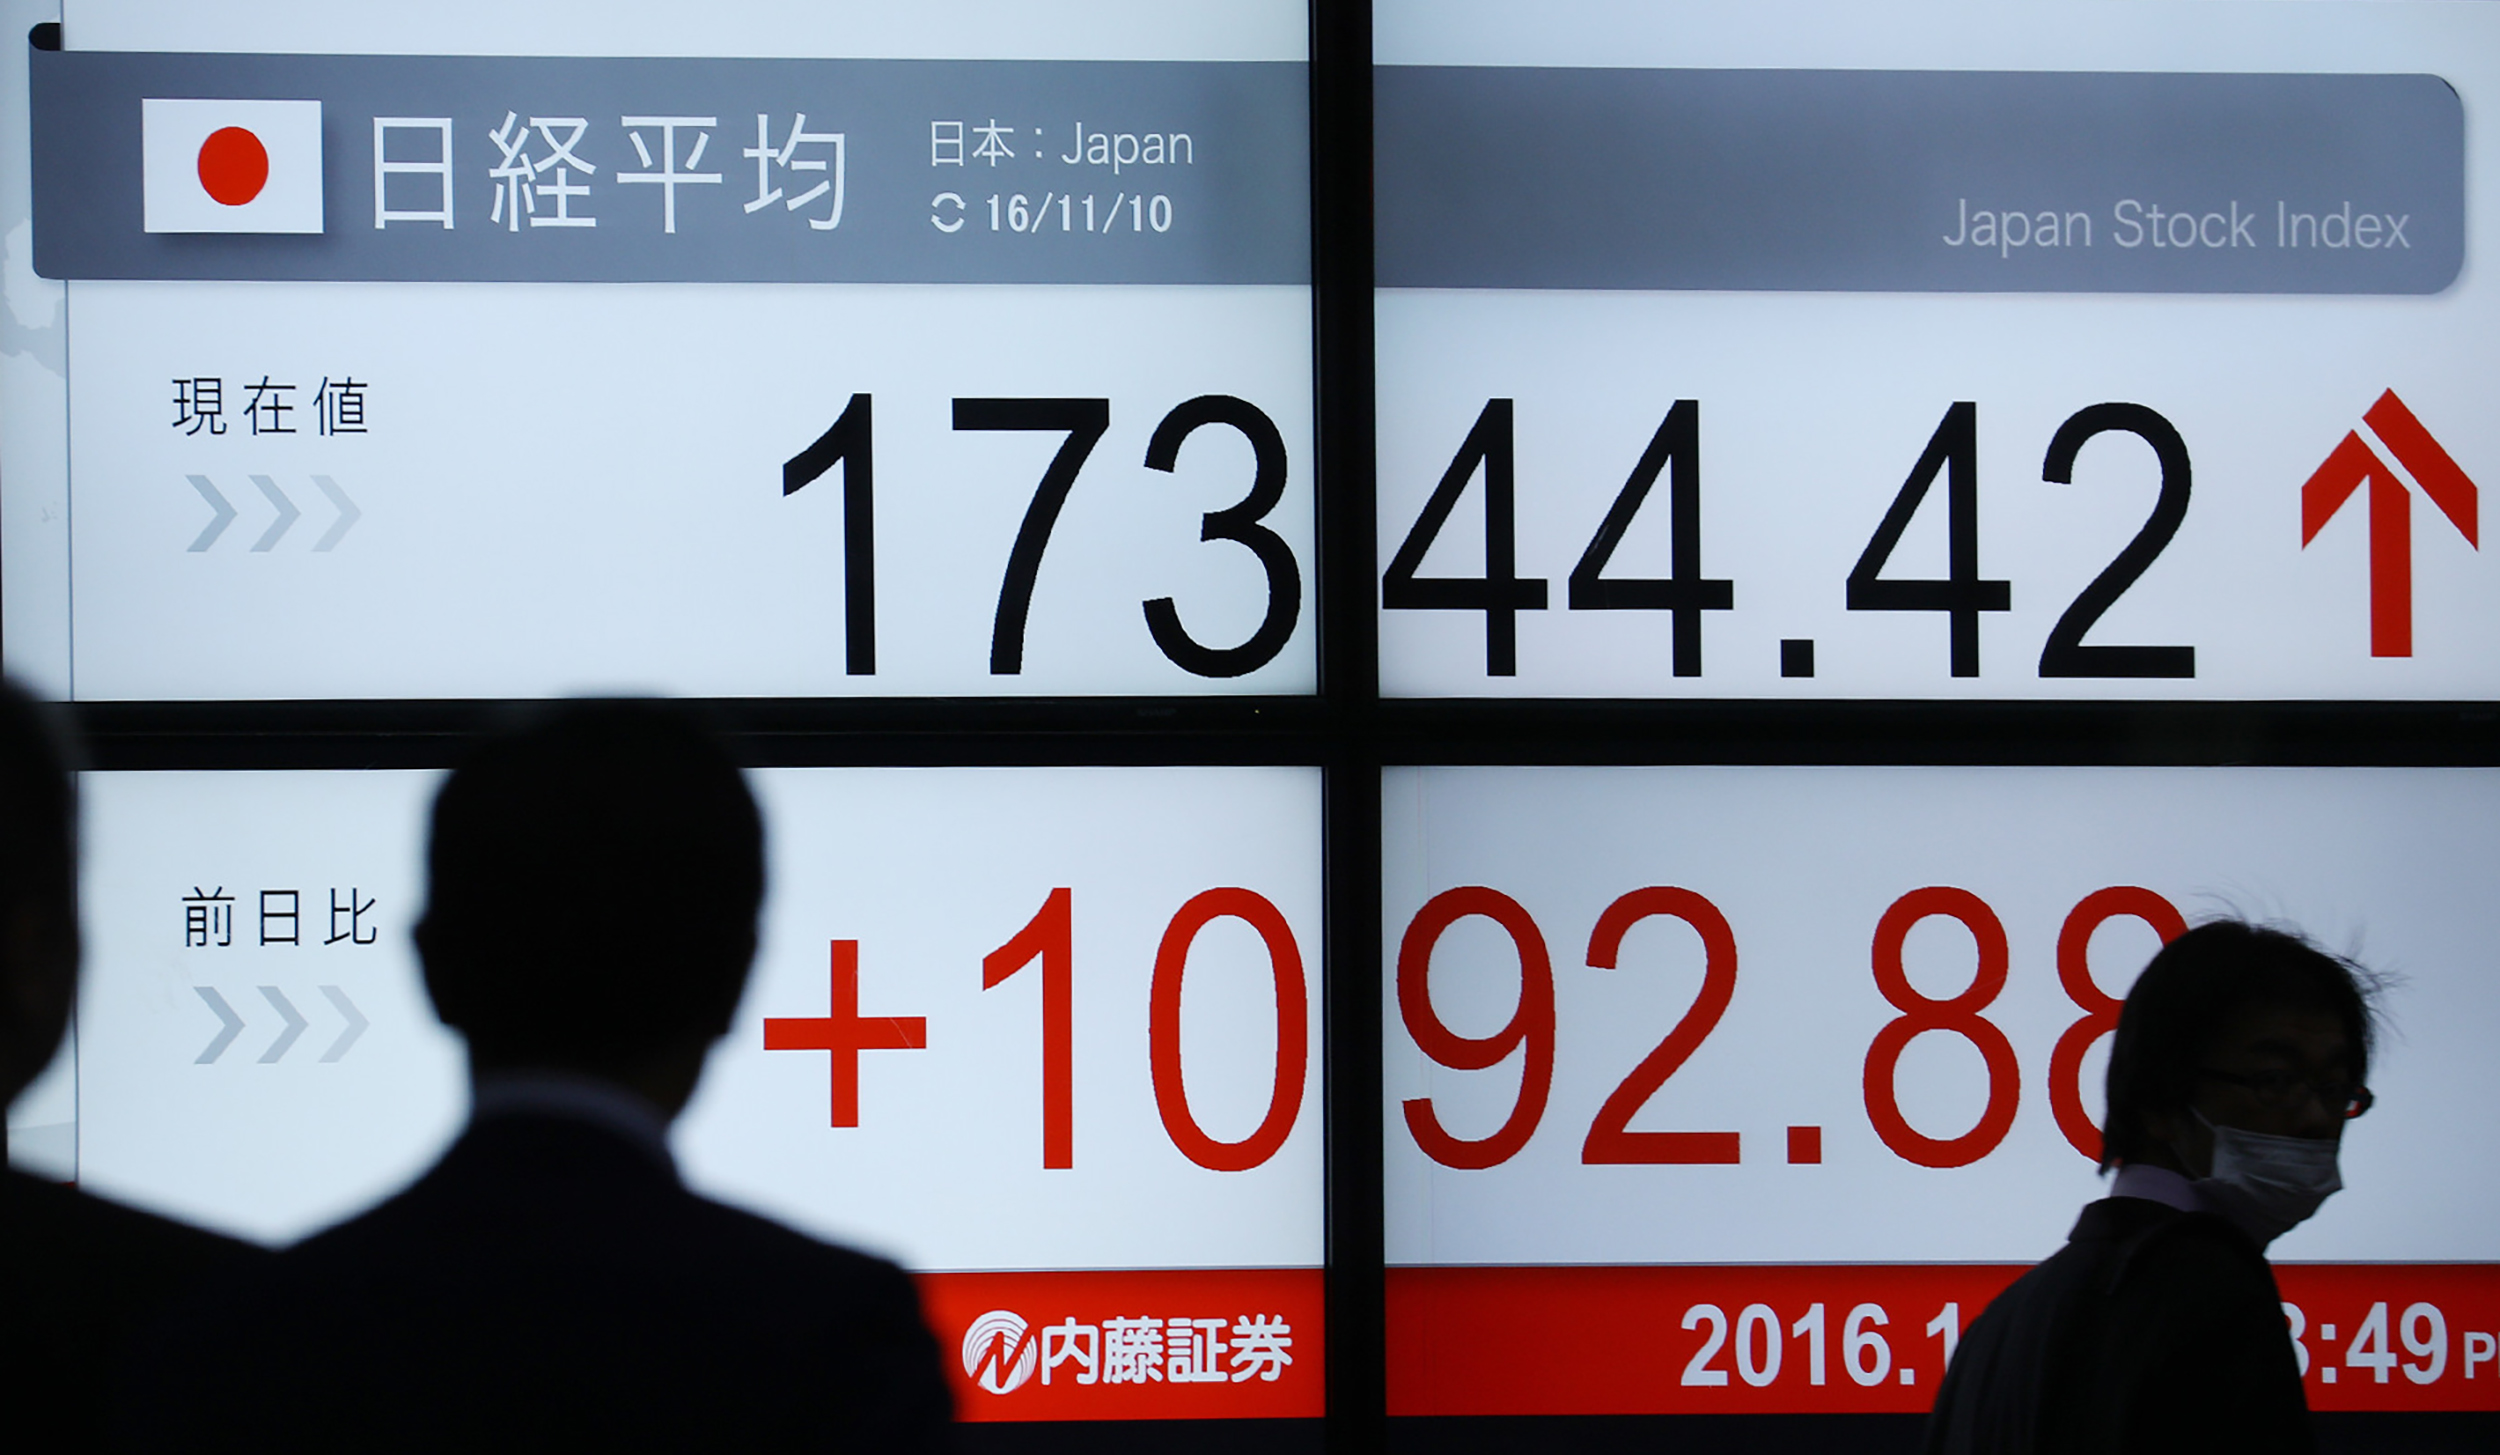 Businessmen walk in front of an electronics stock indicator flashing Tokyo's closing rate on November 10, 2016. Asian equities rallied on November 10, joining a goldrush across world markets as the initial shock of Donald Trump's election win was replaced by hopes his plan to kickstart the US economy will succeed. Japan's key Nikkei 225 index, which plummeted 5.4 percent on the previous day, jumped 1,092.88 points or 6.72 percents to close at 17,344.42. / AFP PHOTO / JIJI PRESS / JIJI PRESS / Japan OUT